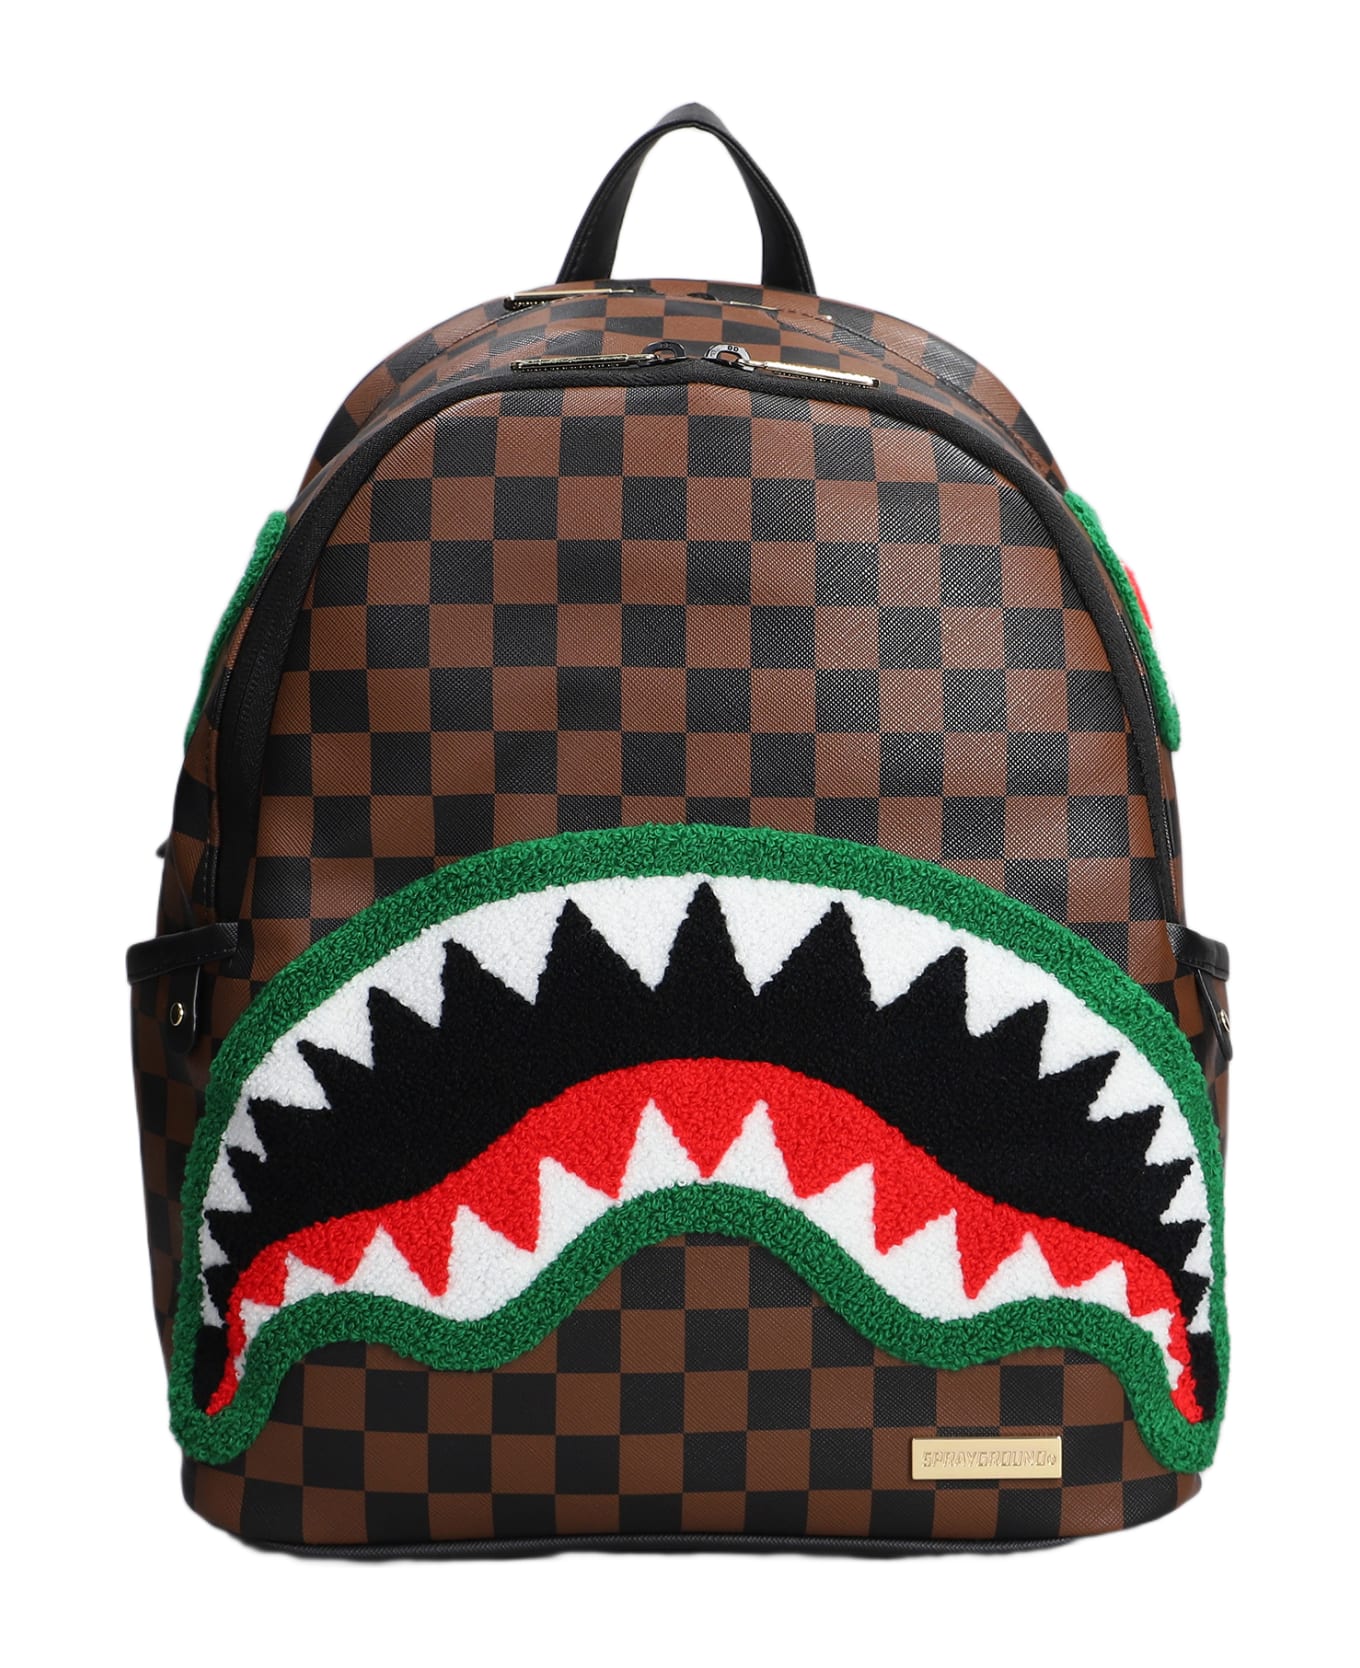 Sprayground Backpack In Brown Pvc - Brown バックパック